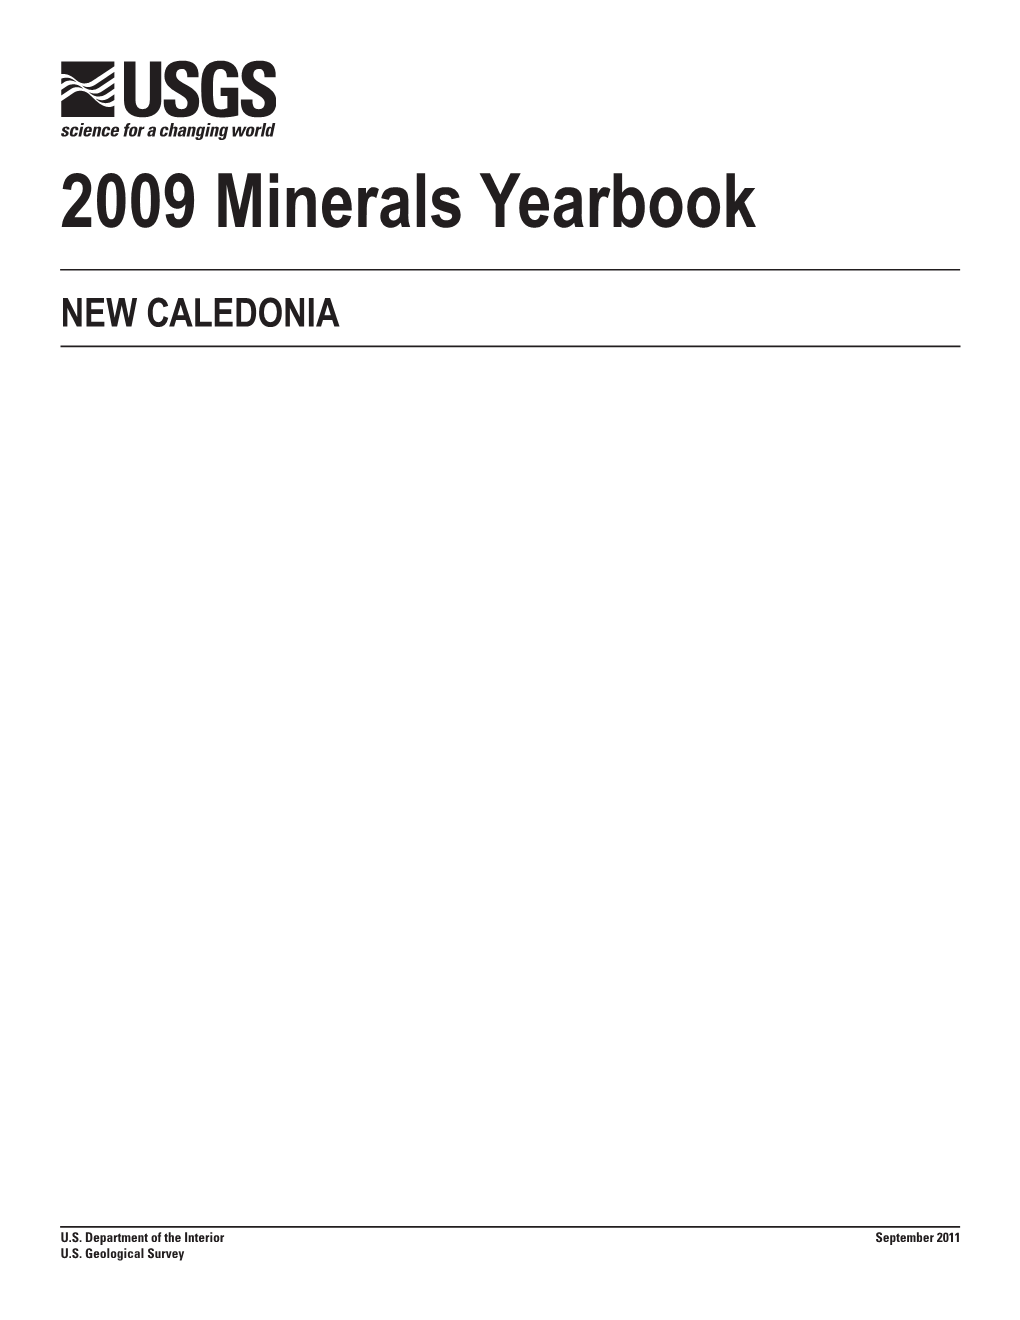 The Mineral Industry of New Caledonia in 2009